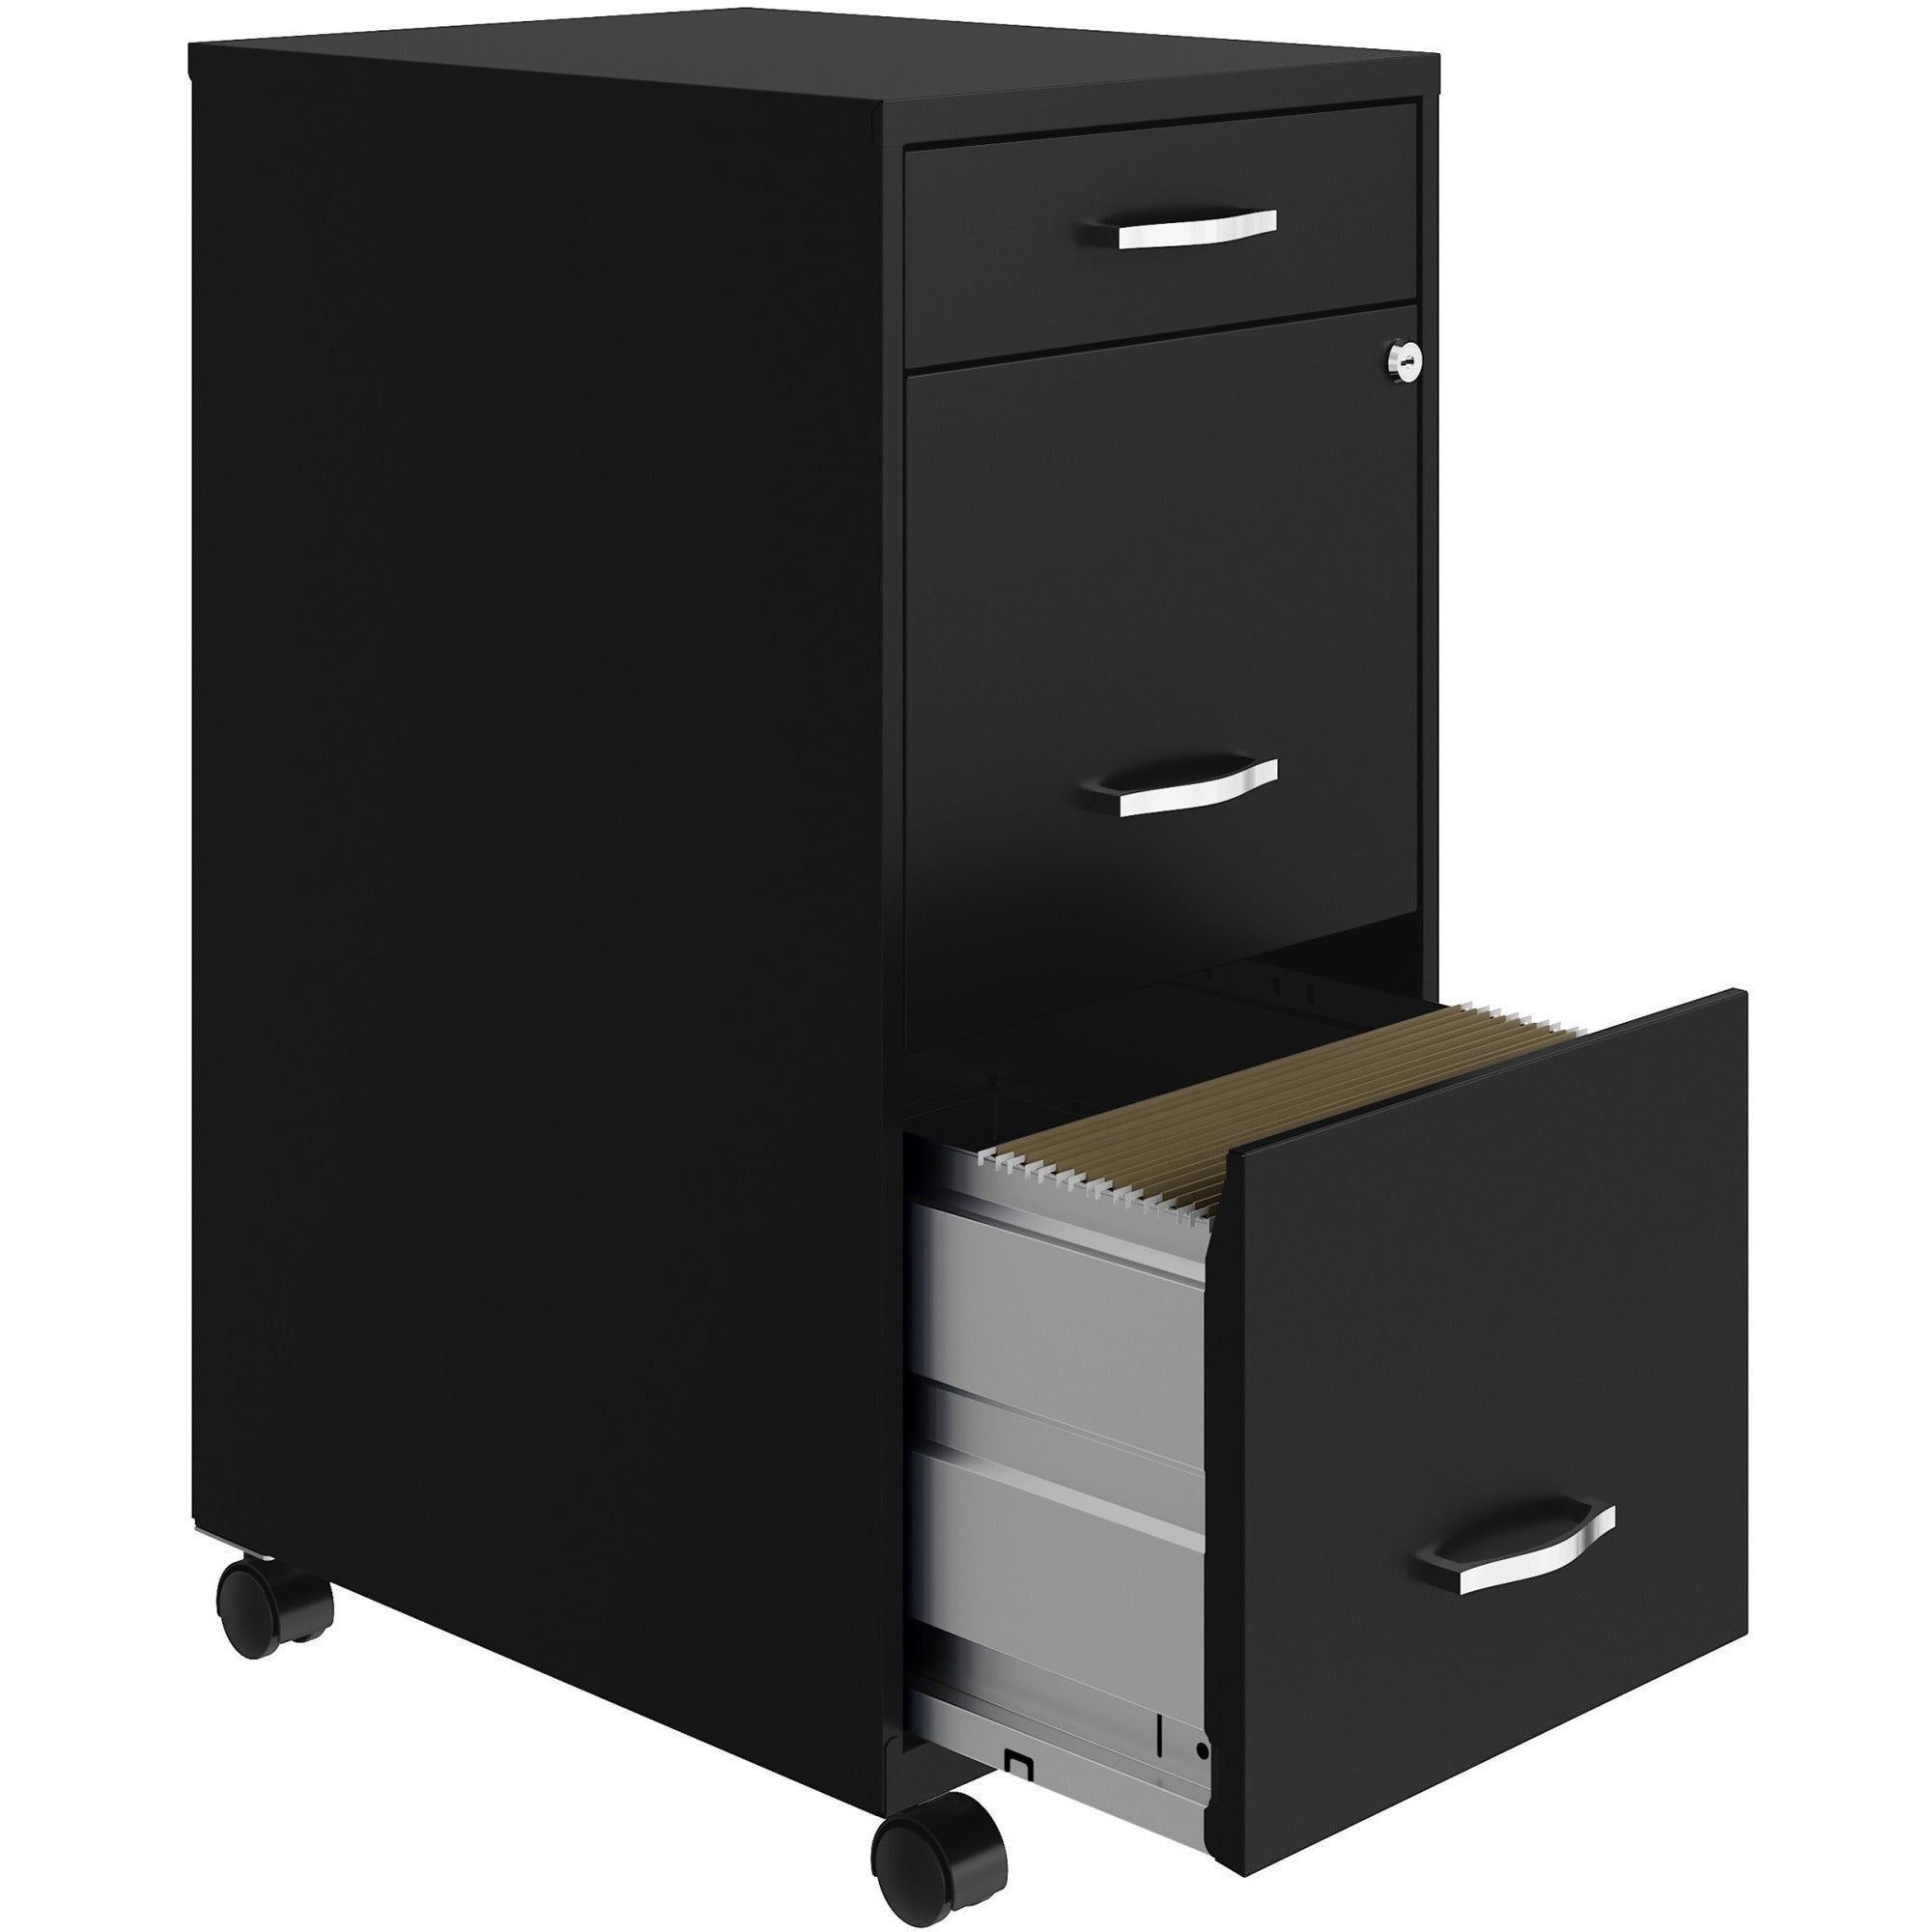 nusparc-mobile-file-cabinet-142-x-18-x-295-3-x-drawers-for-file-box-letter-mobility-locking-drawer-glide-suspension-3-4-drawer-extension-cam-lock-nonporous-surface-black-painted-steel-recycled_nprvf318bmbk - 4